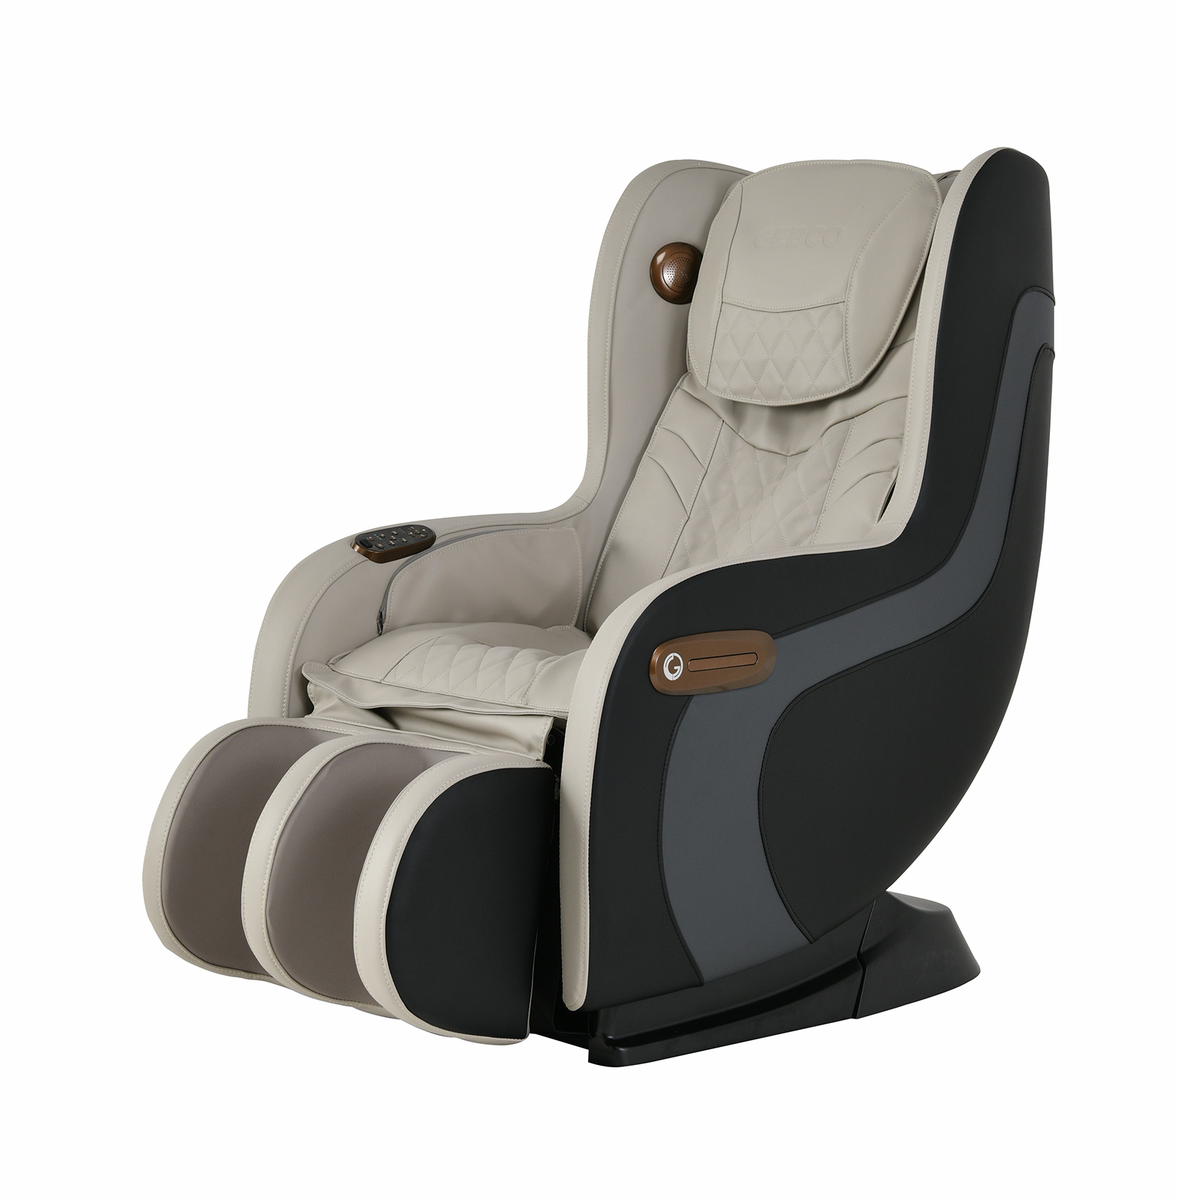 2022 GEBCO Comely SL-Track Lite Massage Chair (Gray/Black)